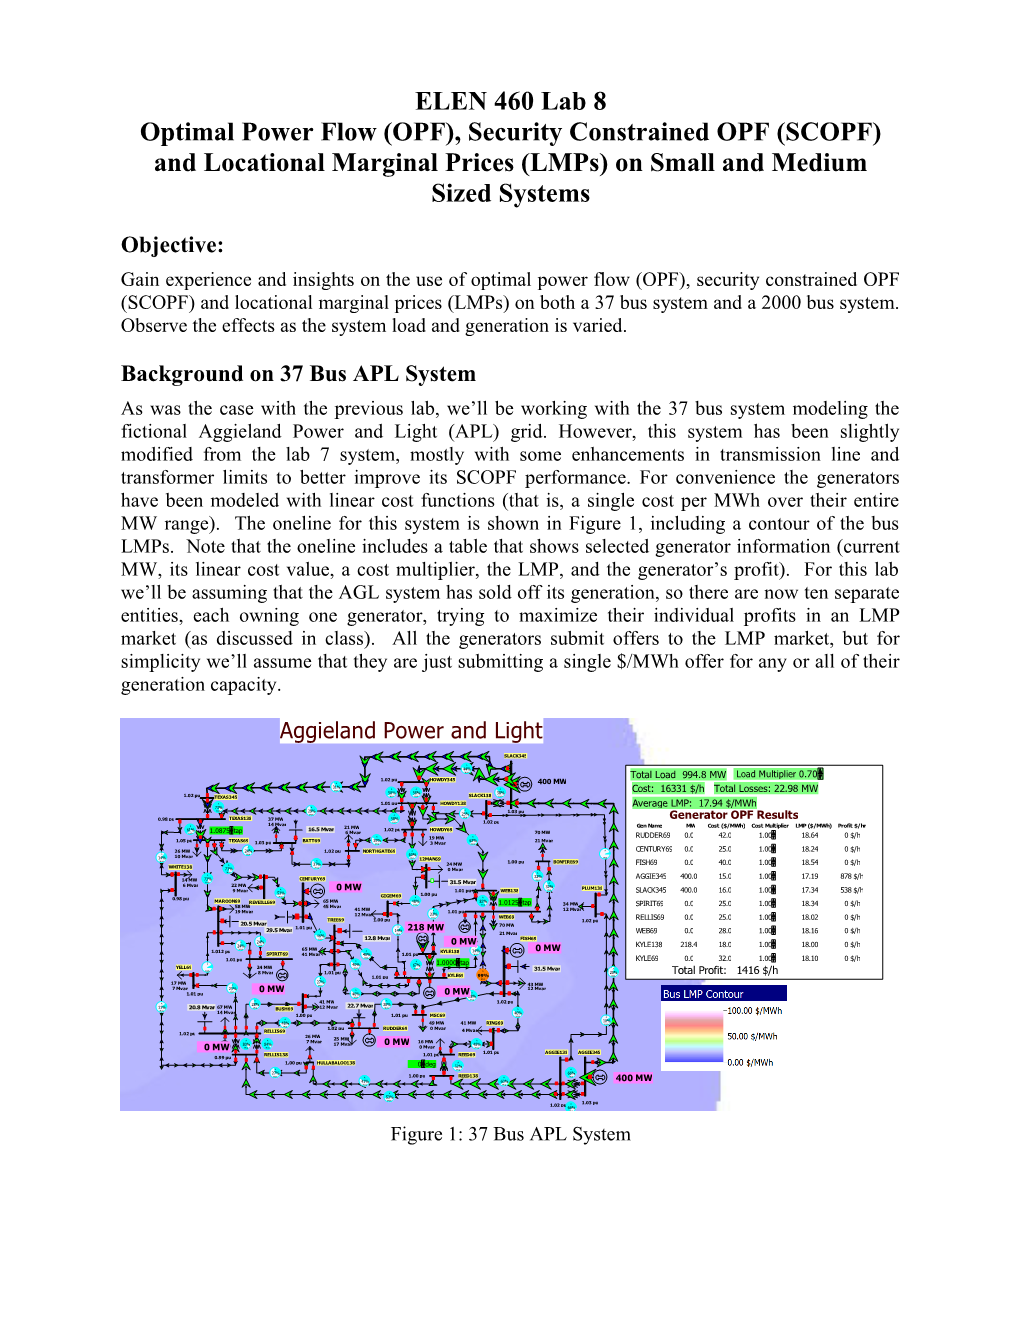 Background on 37 Bus APL System